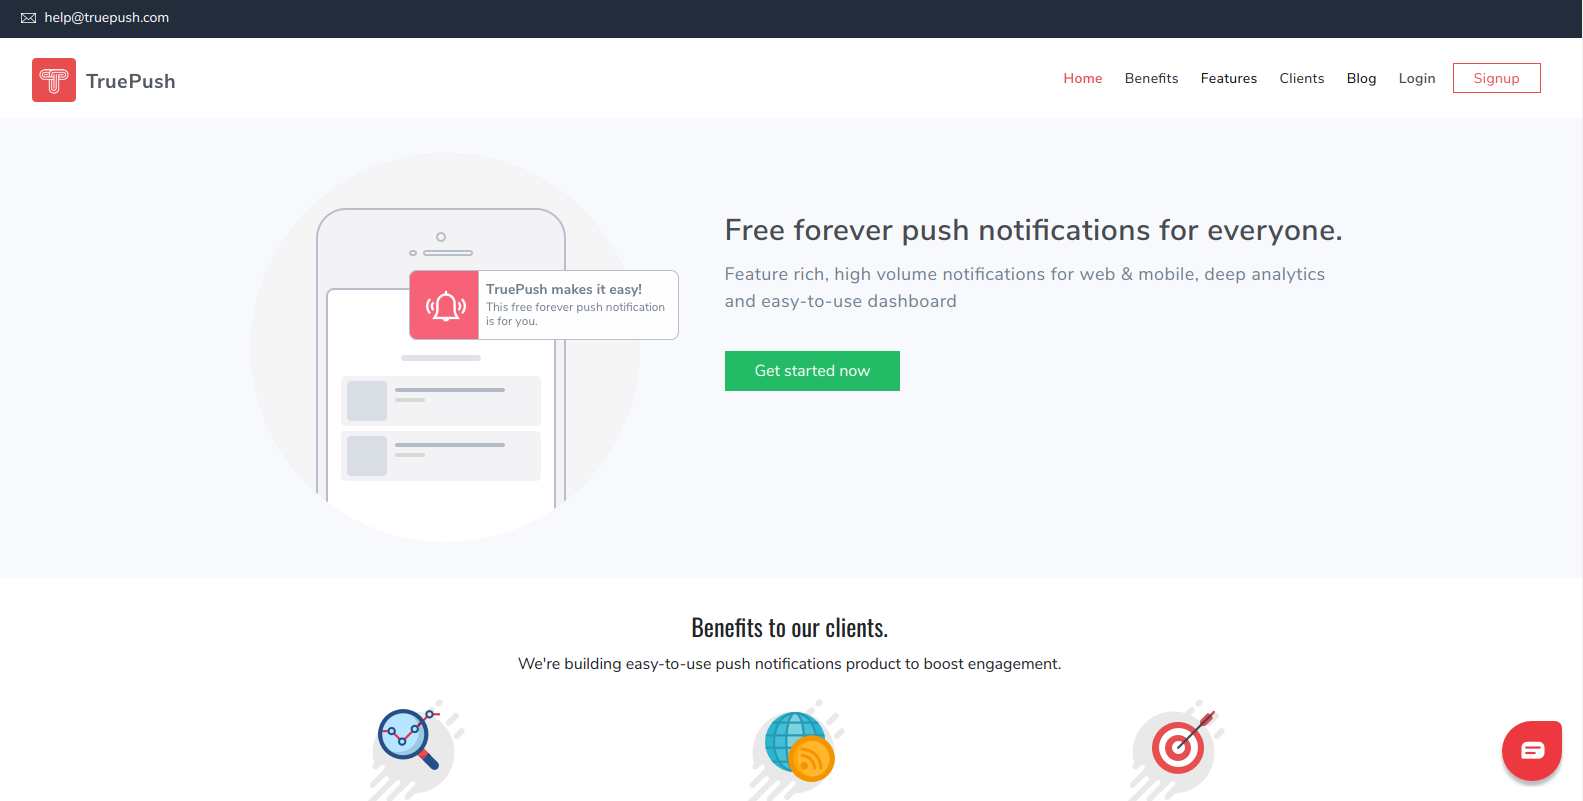 Why choose Truepush as your preferred push notifications service?